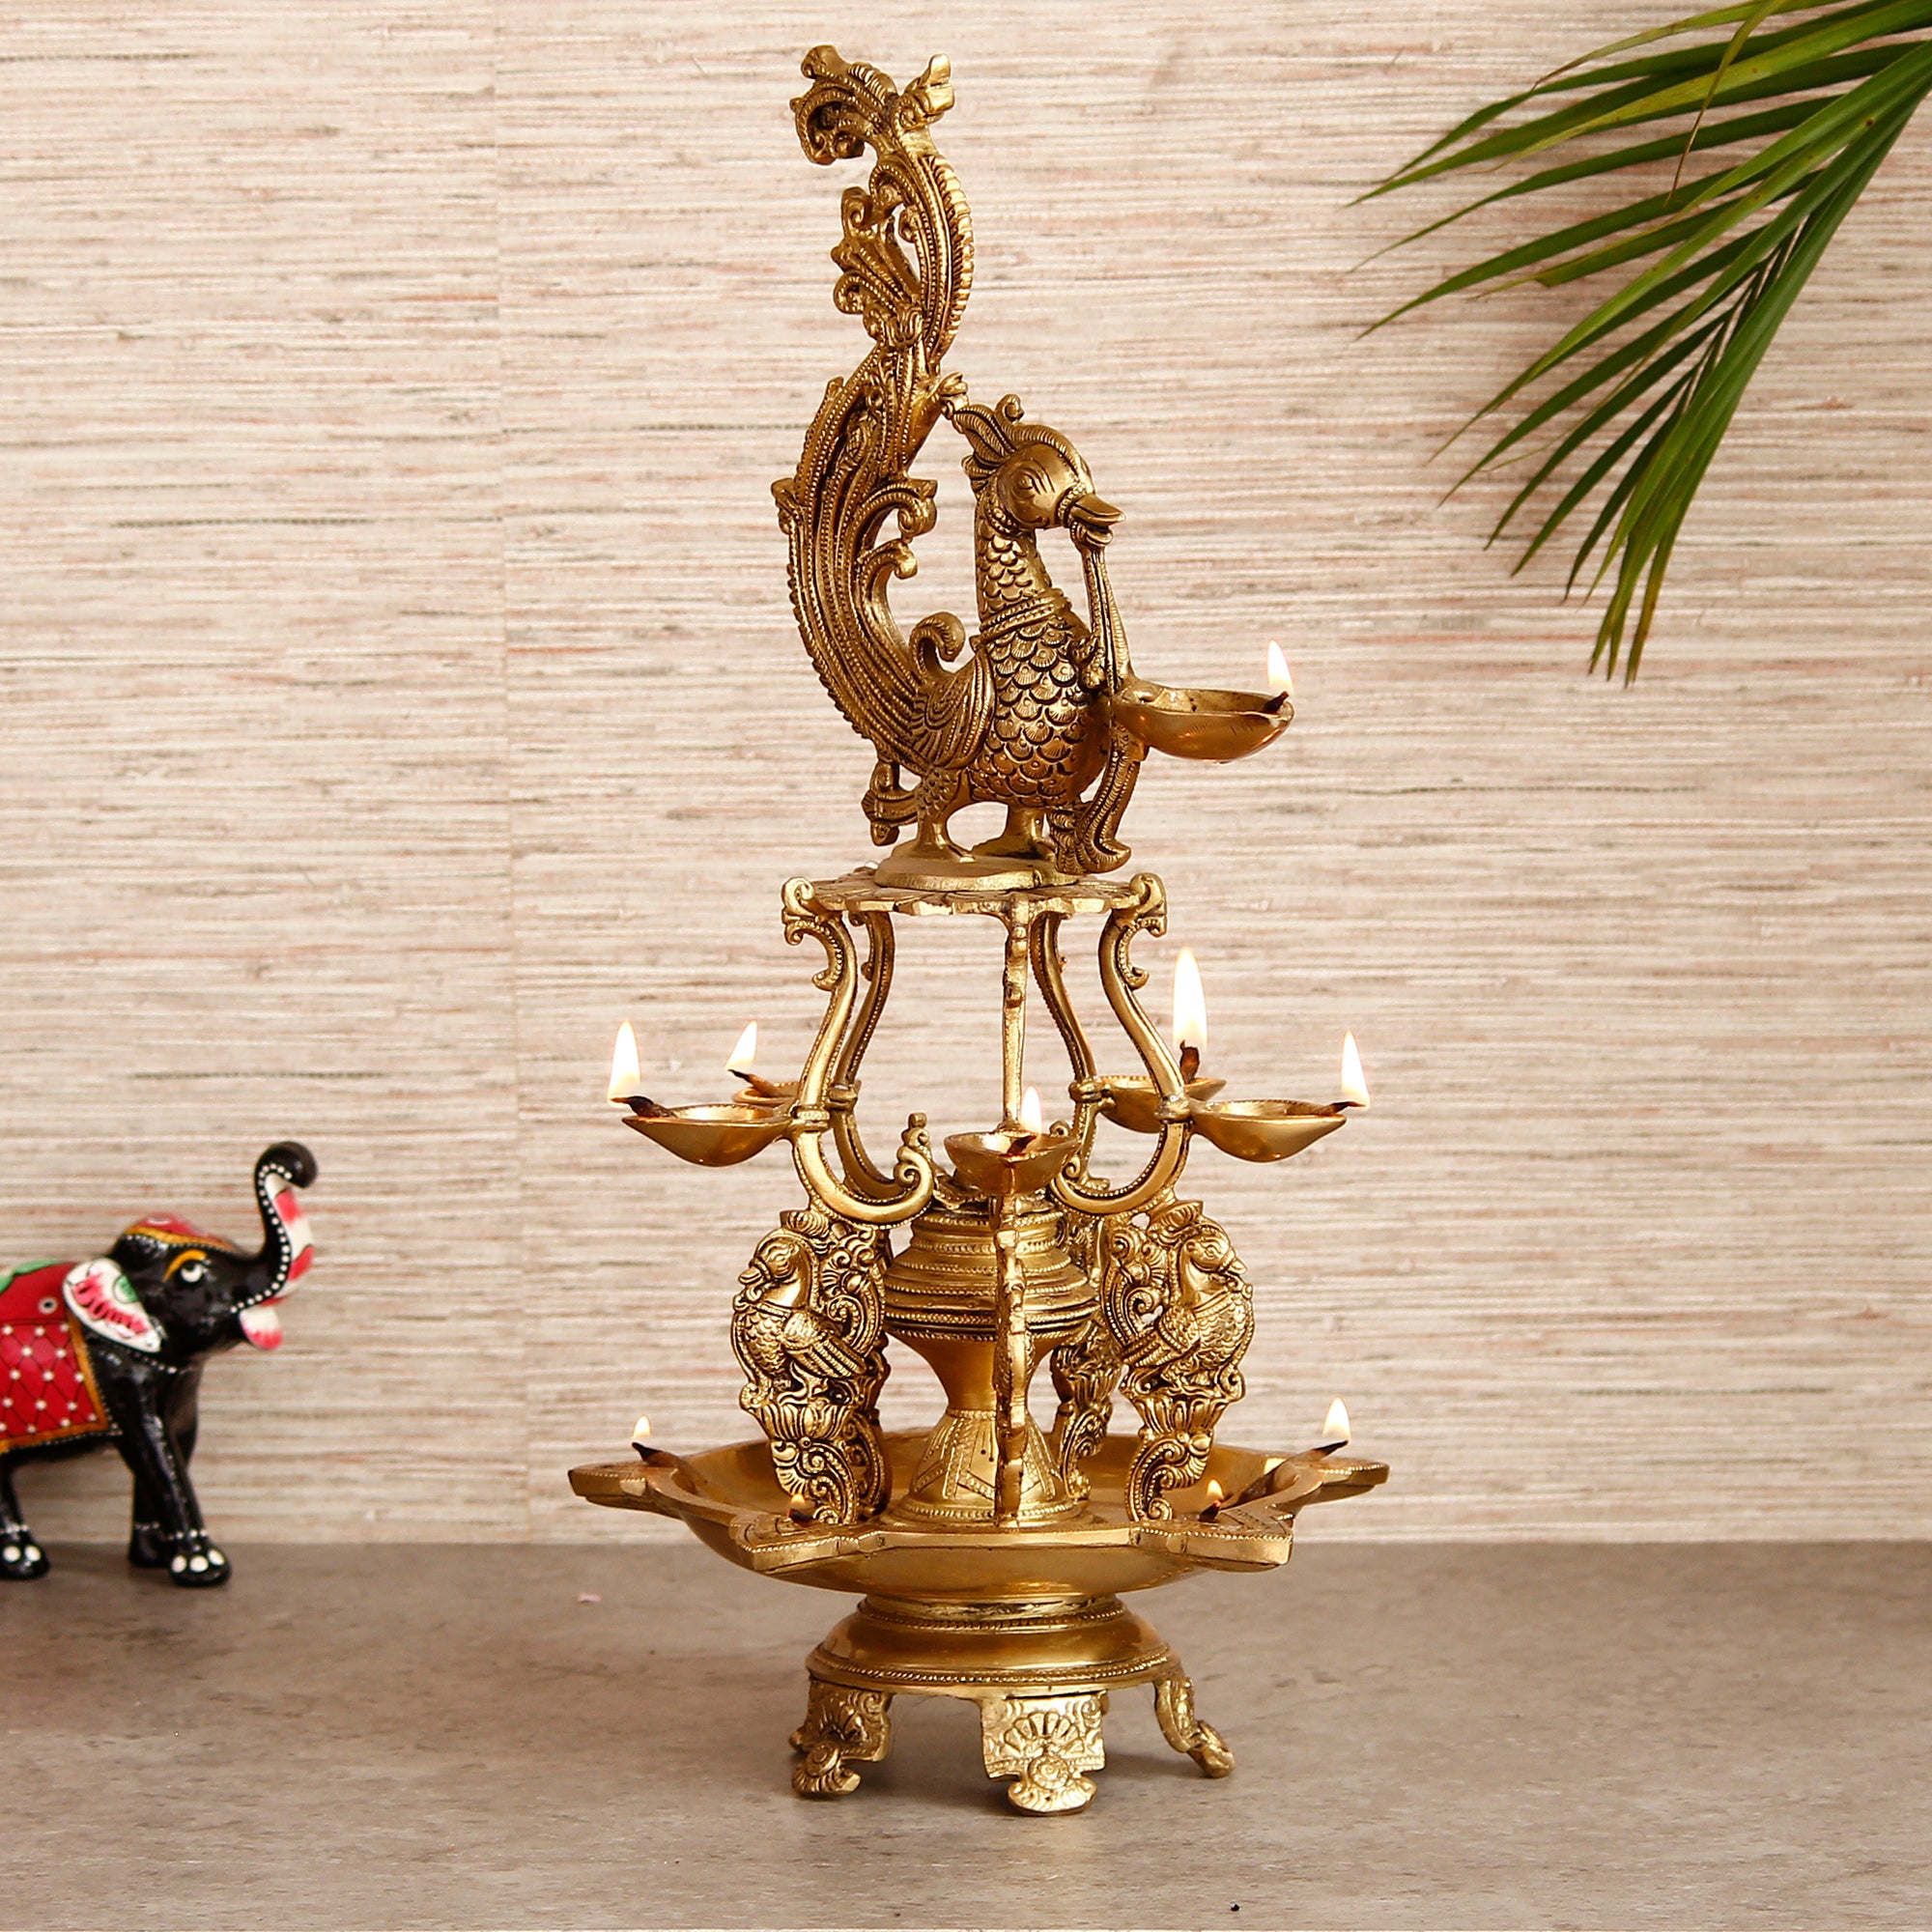 Golden Antique Finish Decorative Handcrafted Brass Peacock Showpiece with Brass Diyas for 11 Wicks and Stand